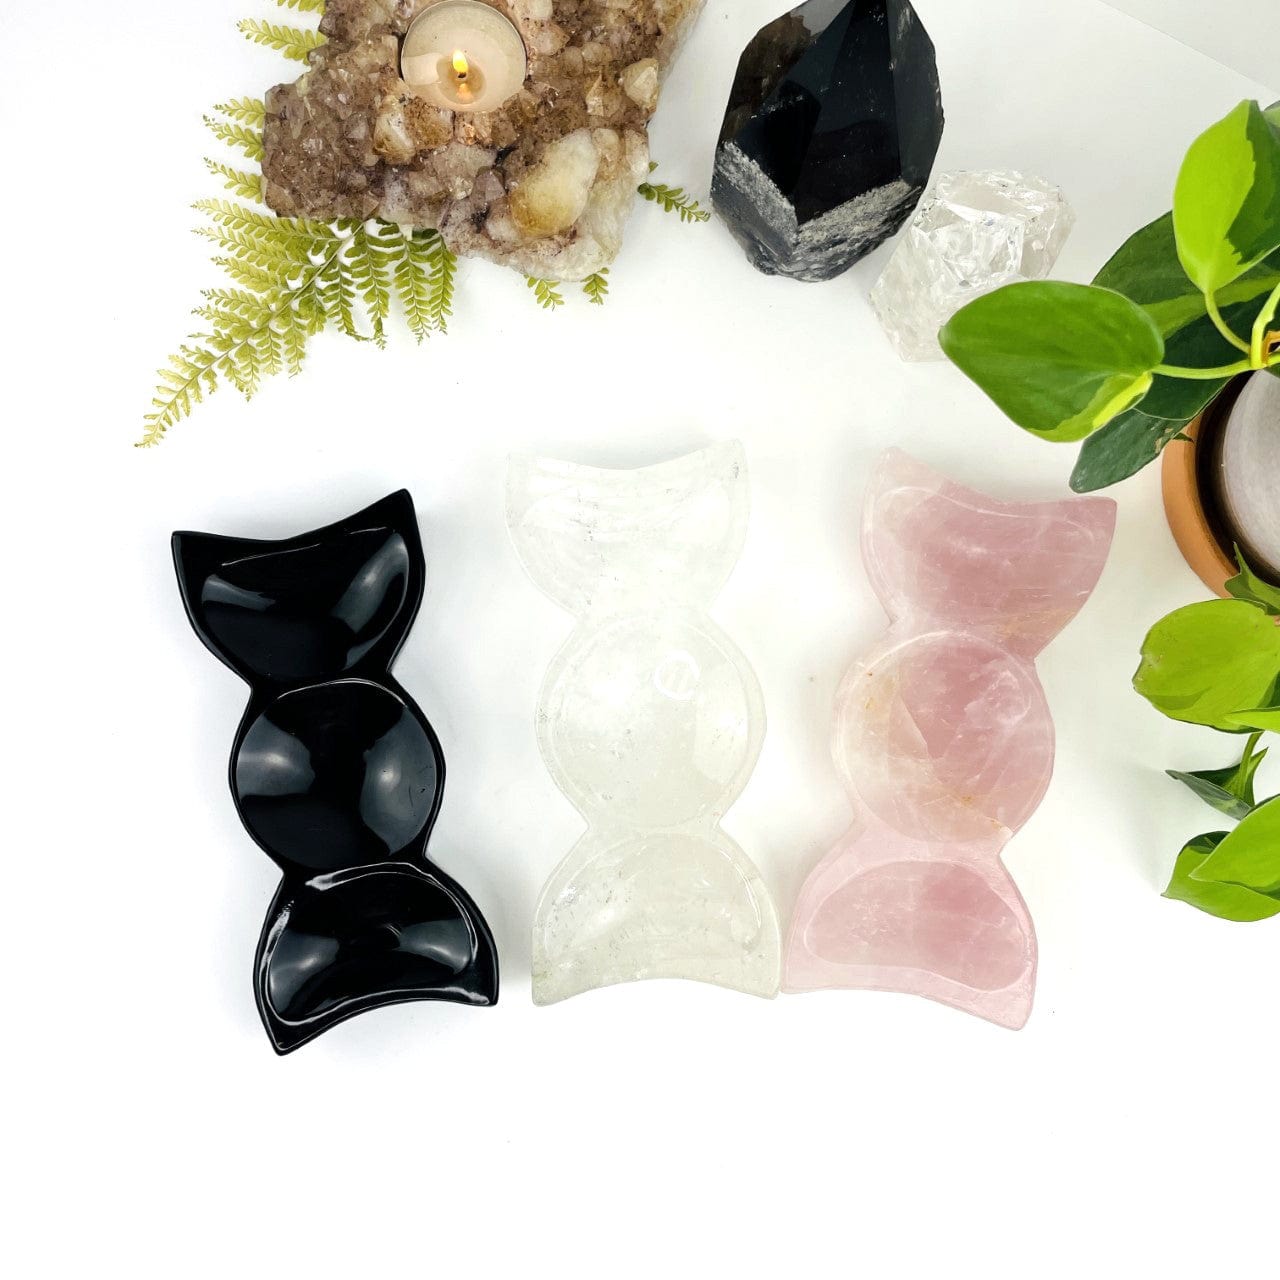 Stone Triple Moon Goddess Bowls, in each of the available stone:black obsidian, rose quartz and crystal quartz